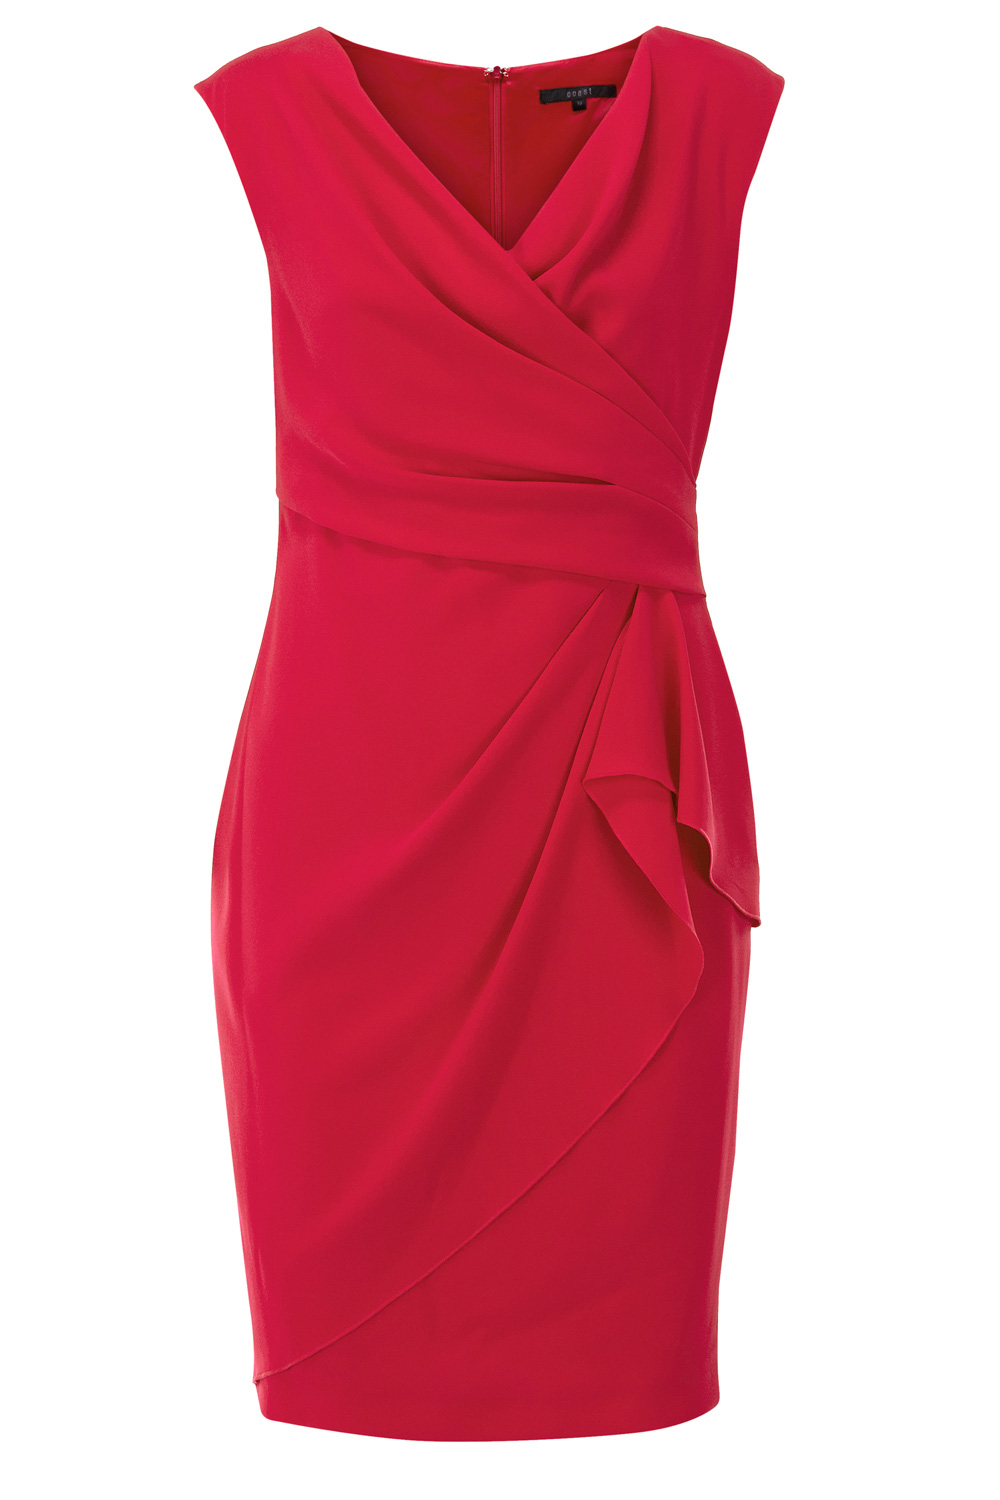 Lyst - Coast Emmy Crepe Dress in Red